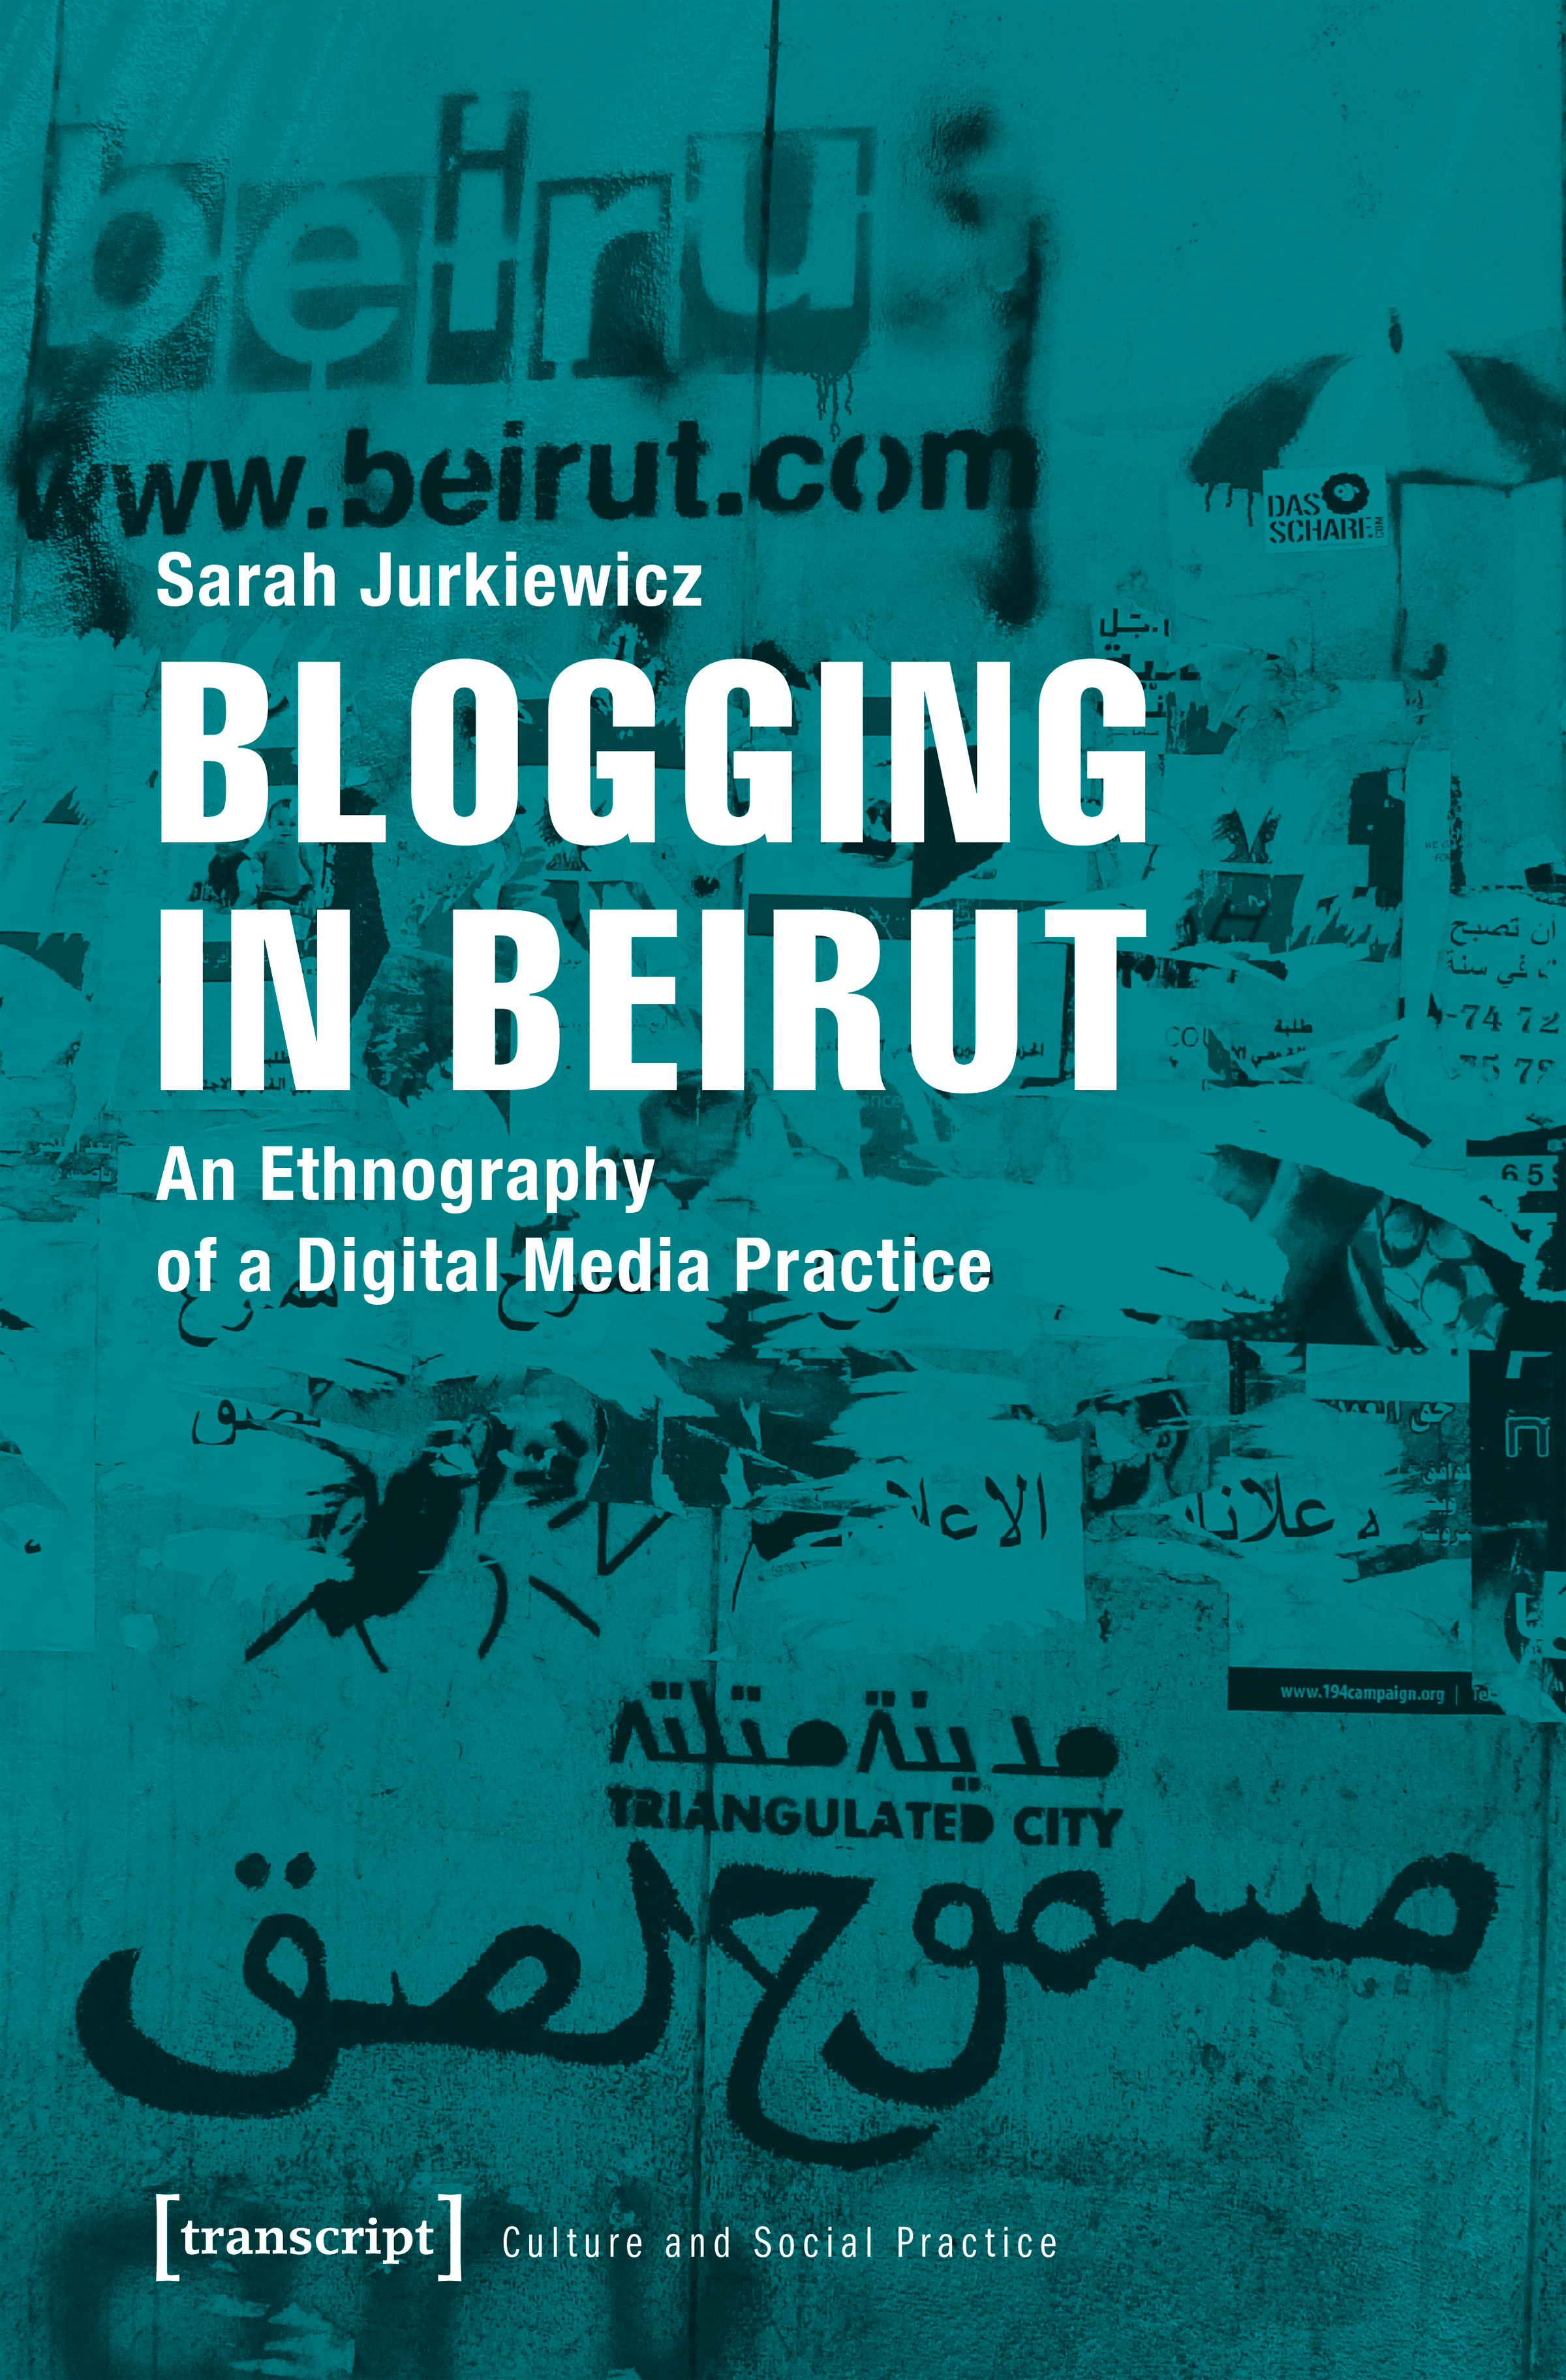 Cover: Jurkiewicz (2018). Blogging in Beirut. An Ethnography of a Digital Media Practice.